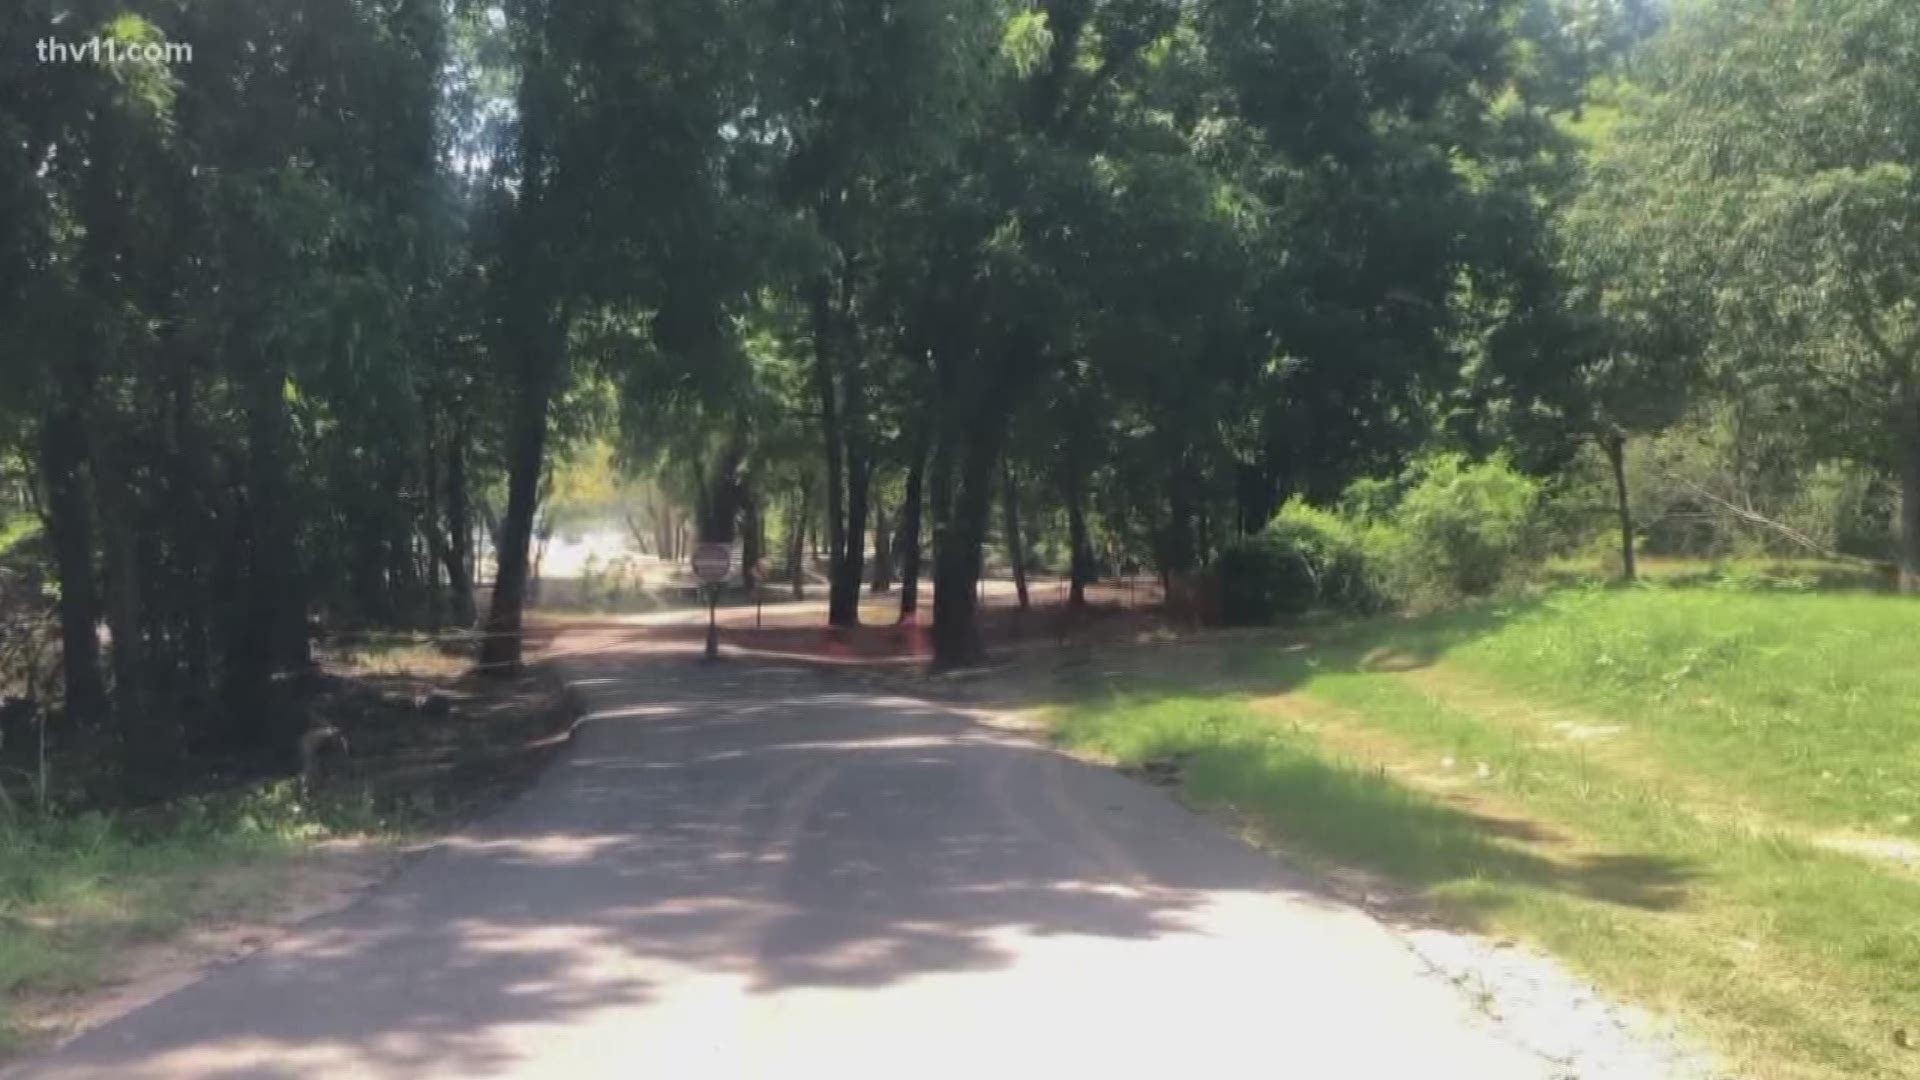 After the Arkansas River flooding, city crews had a lot of work ahead of them to get things back to normal. Those crews continue to clean up parks.